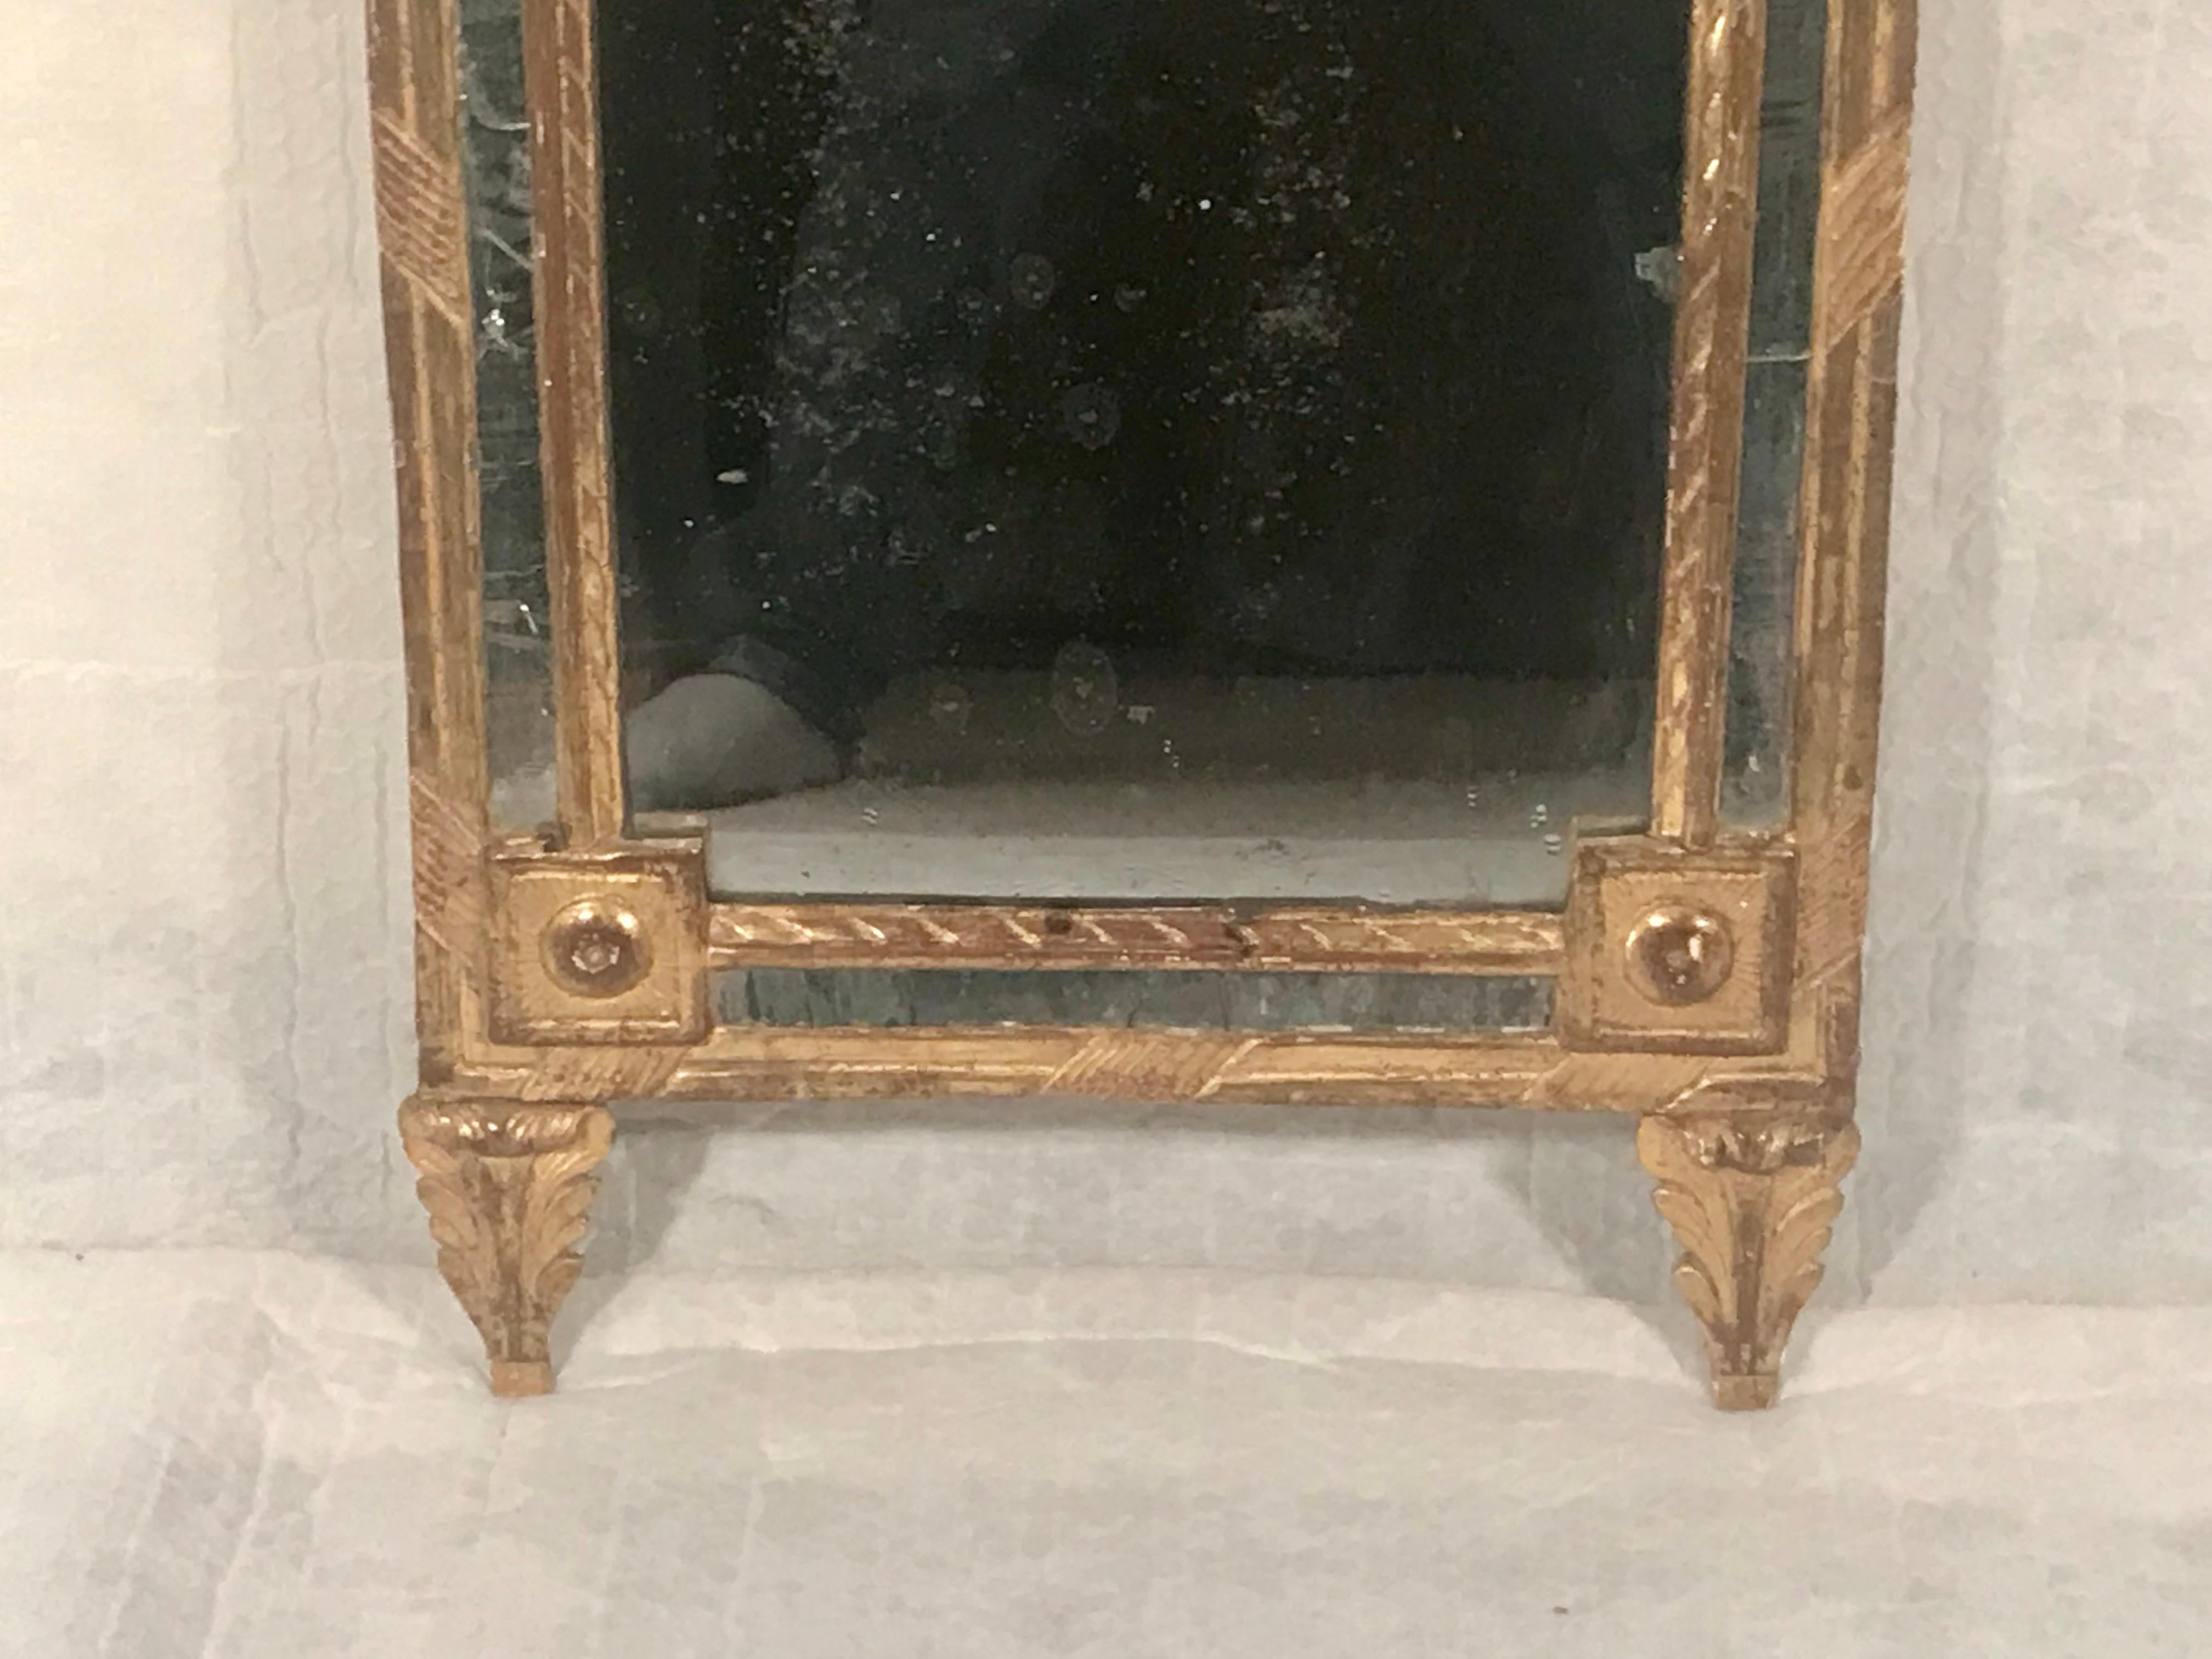 Step into the opulent world of 18th-century France with this exquisite Louis XVI Mirror. Crafted in the 1780s, this mirror showcases the epitome of French craftsmanship and design.

Hand-carved from gilt wood, every detail of this mirror exudes